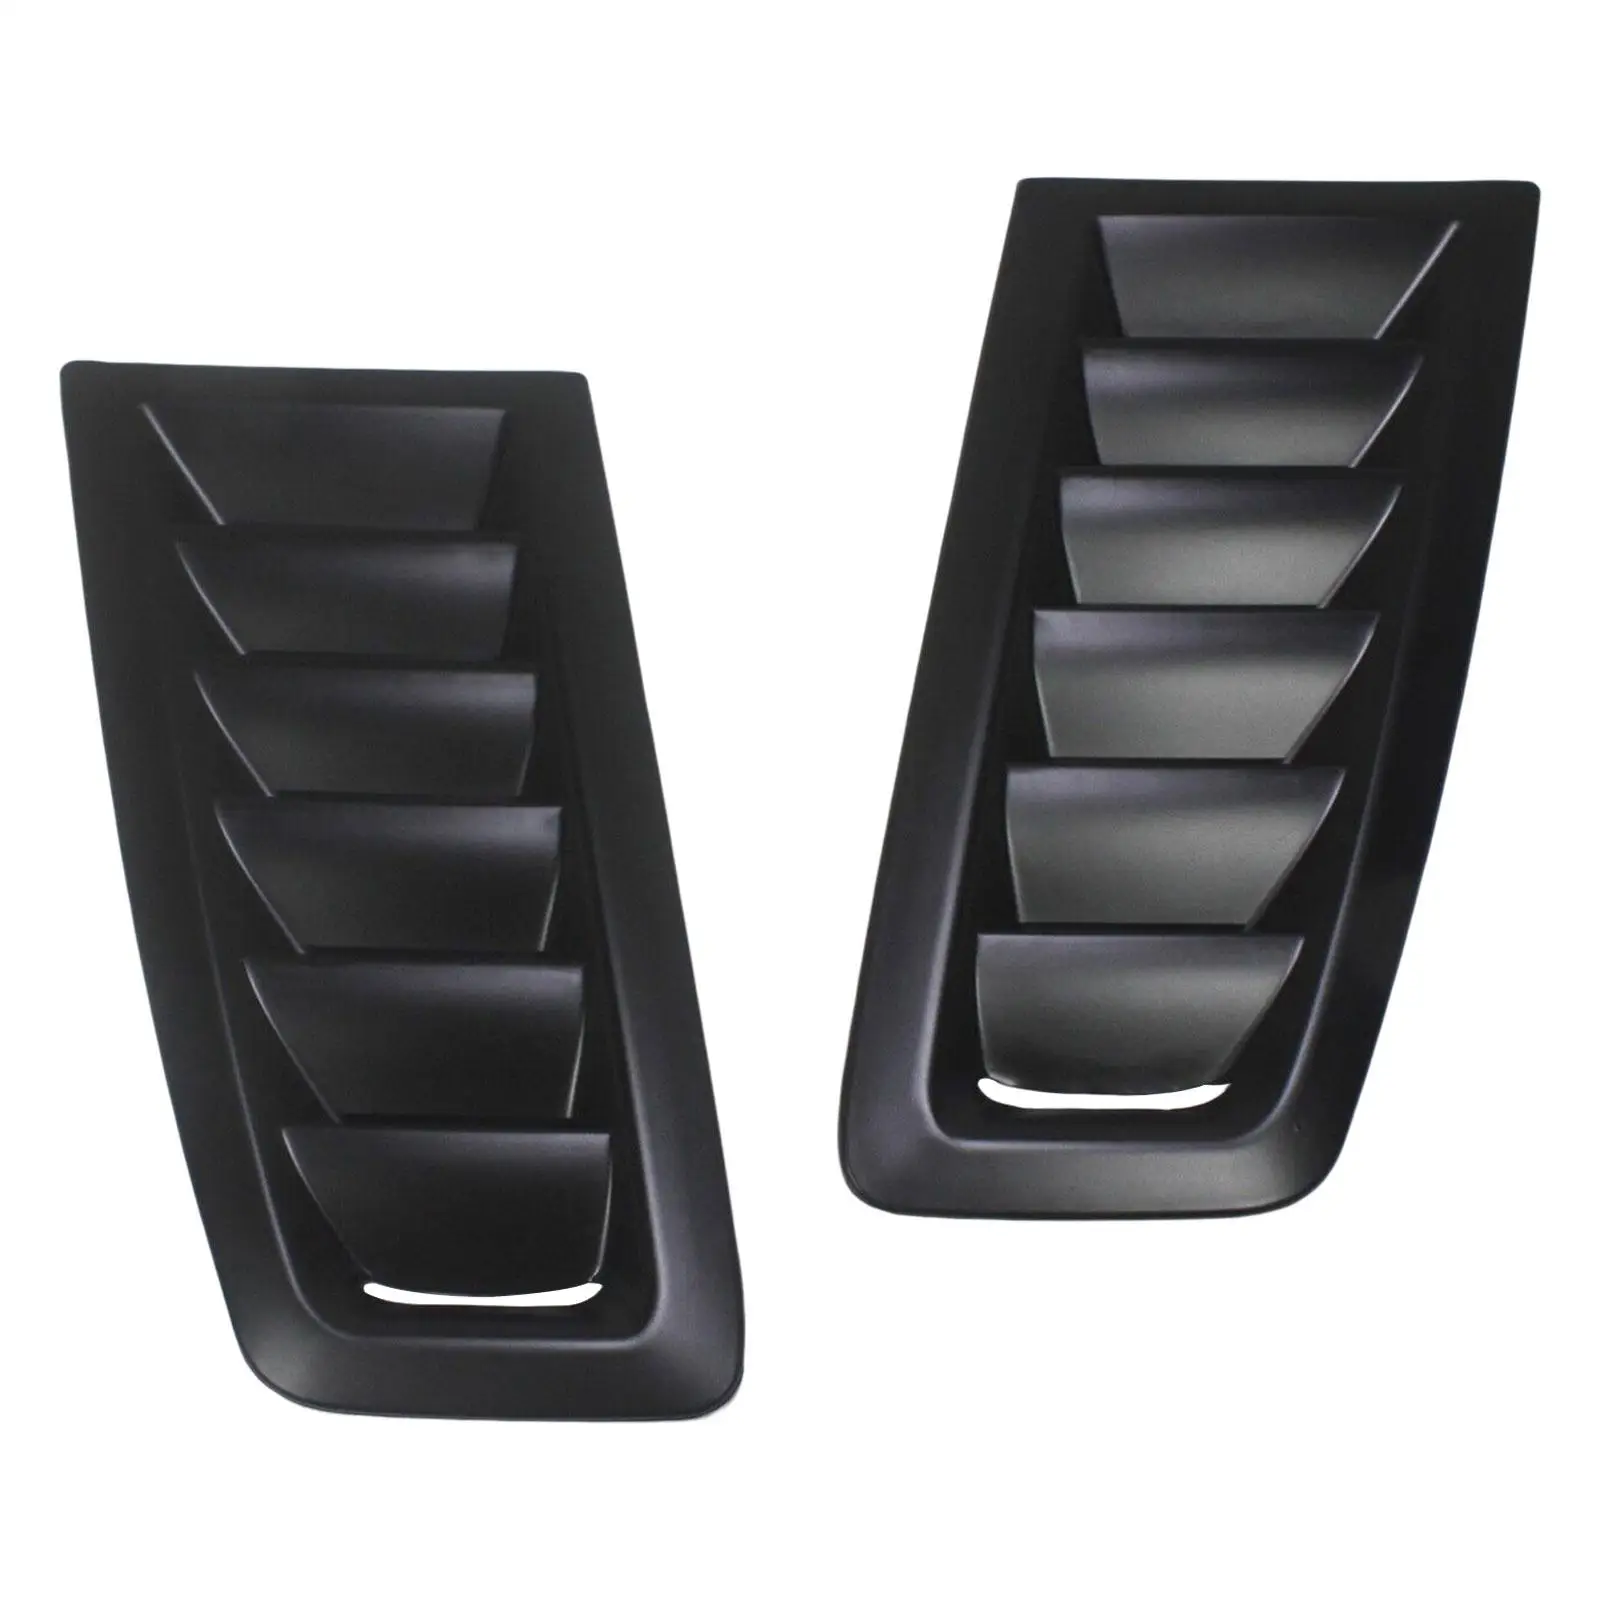 2x Bonnet Air Vent Hood Cover Car Hood Vent Scoop Kit for Ford Focus RS